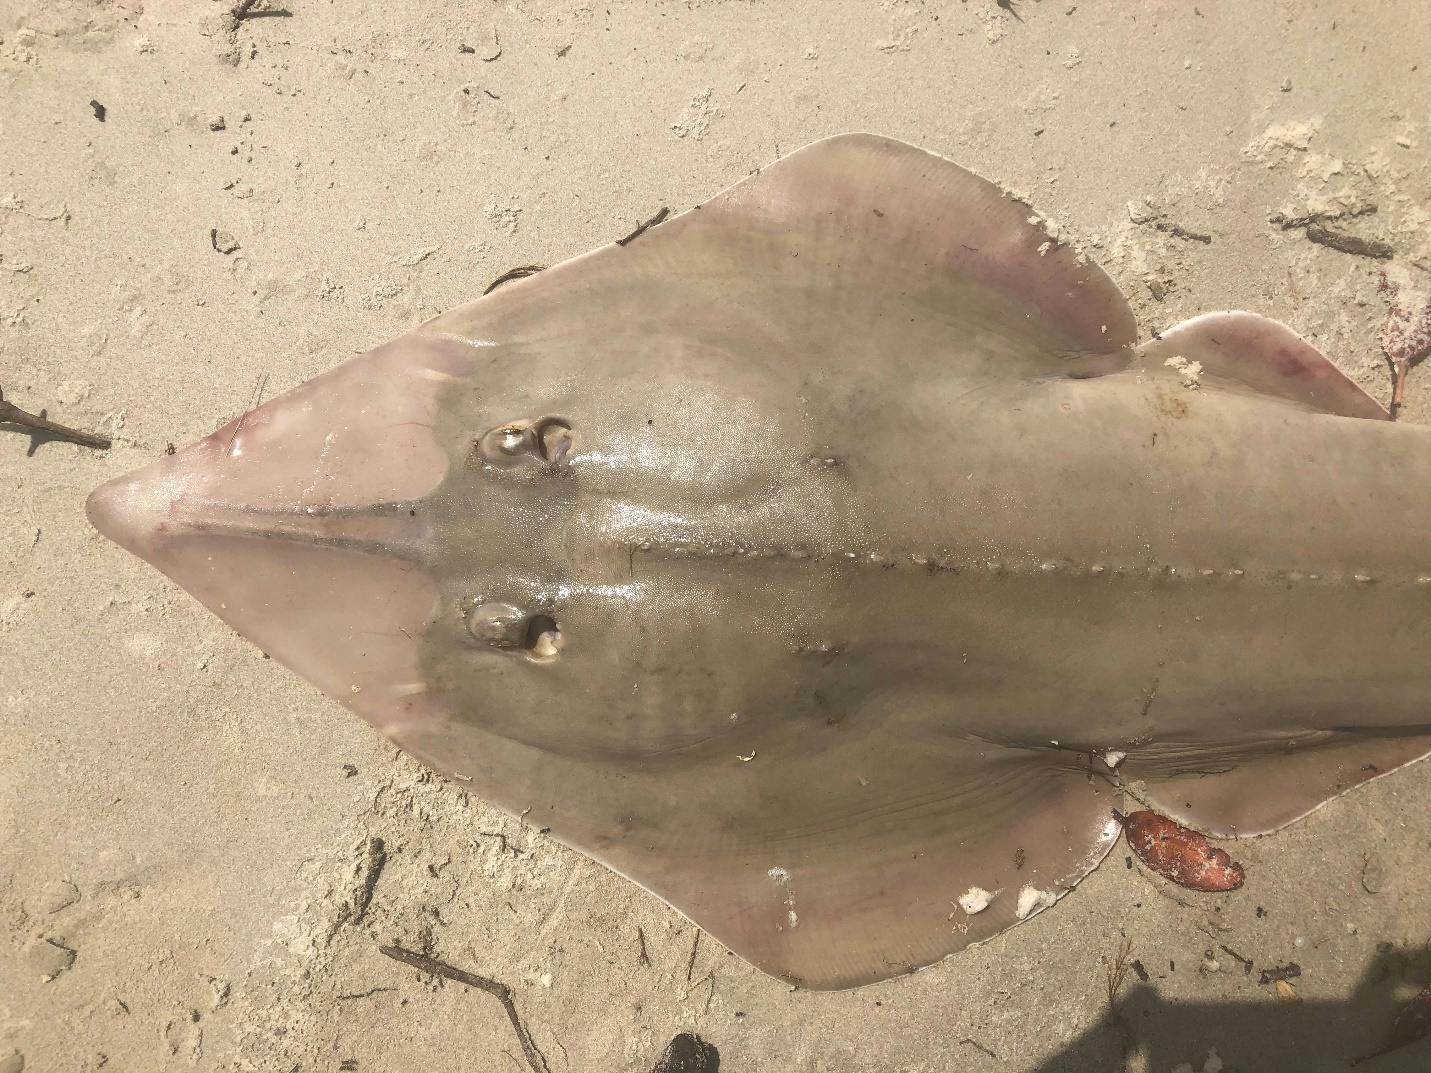 Unravelling fishing and trade of endangered guitarfish in the Bijagos Archipelago